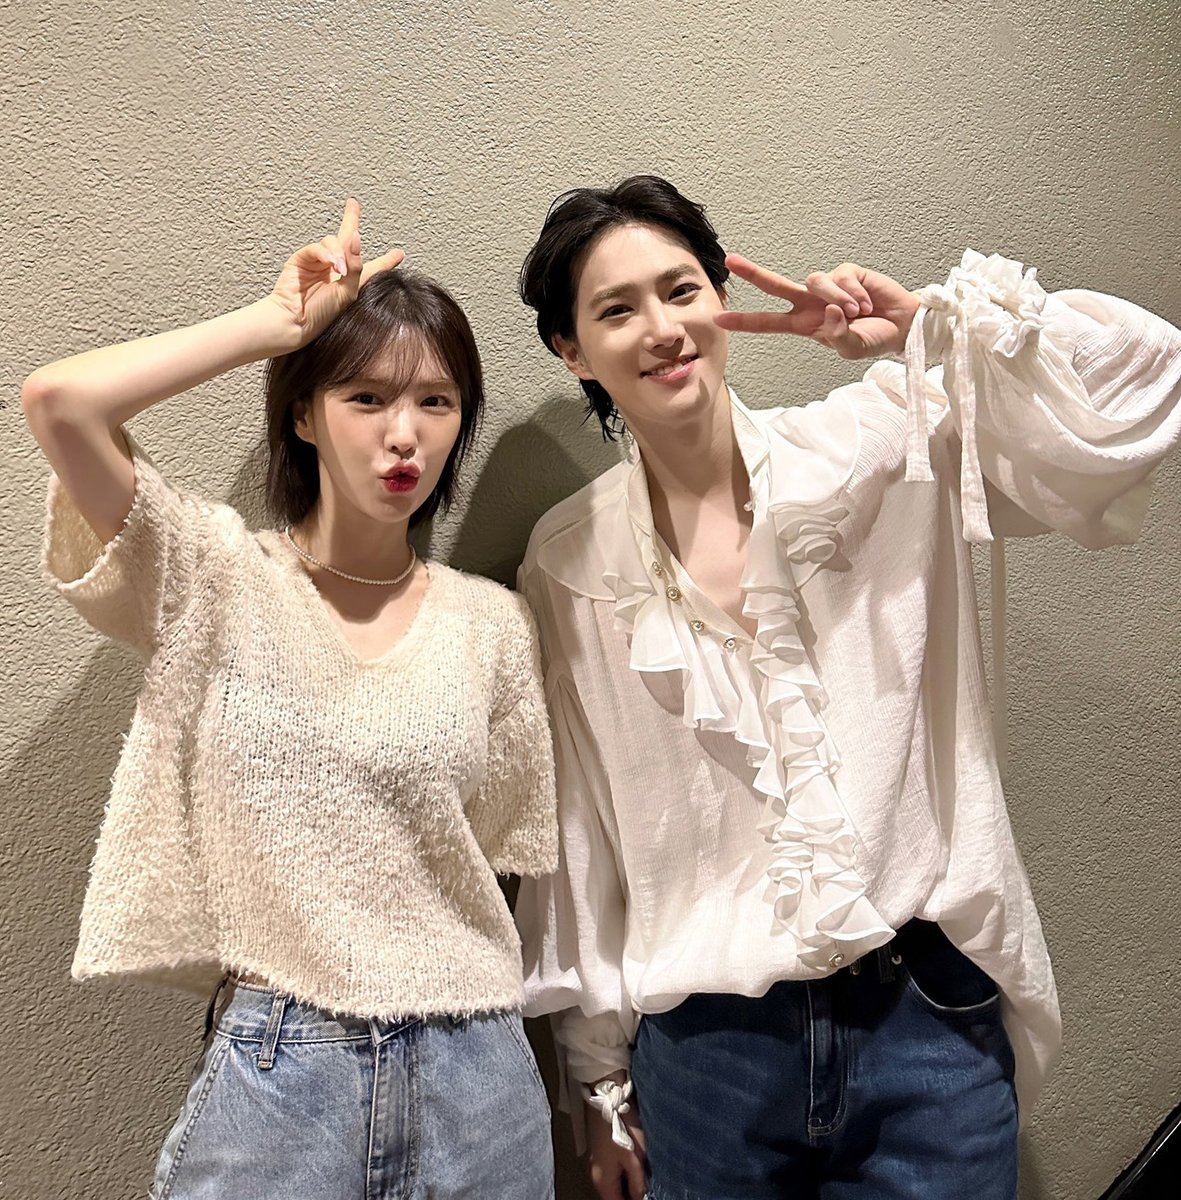 #EXO's #Suho and #RedVelvet's #Wendy will release new collab ‘Cheese’ on May 20 from Suho's highly anticipated 3rd studio album ‘점선면 (1 to 3)’ out June 3rd! 👏👨‍🎤👩‍🎤🆕🎶🧀💥5⃣/2⃣0⃣🥉💿💥🌎6⃣/3⃣ 👑👑❤️‍🔥!